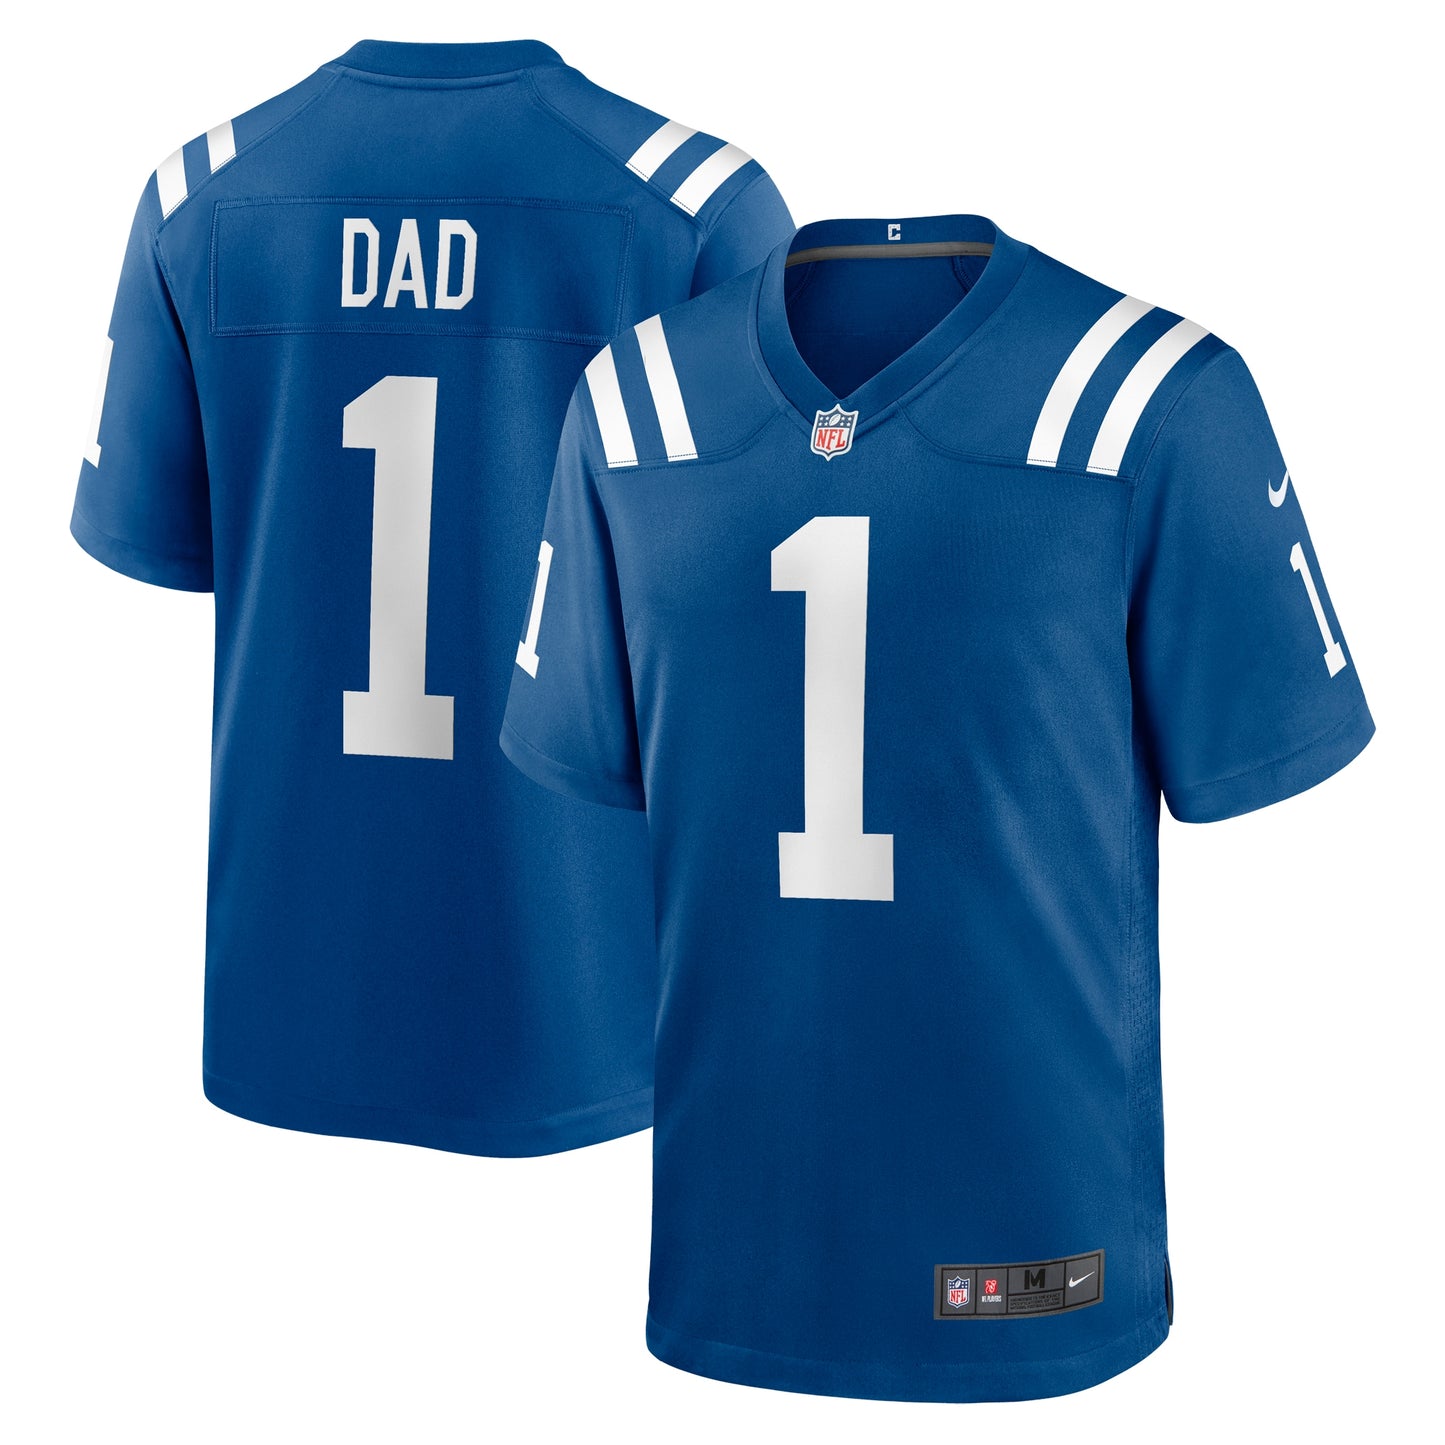 Number 1 Dad Indianapolis Colts Nike Game Jersey - Royal